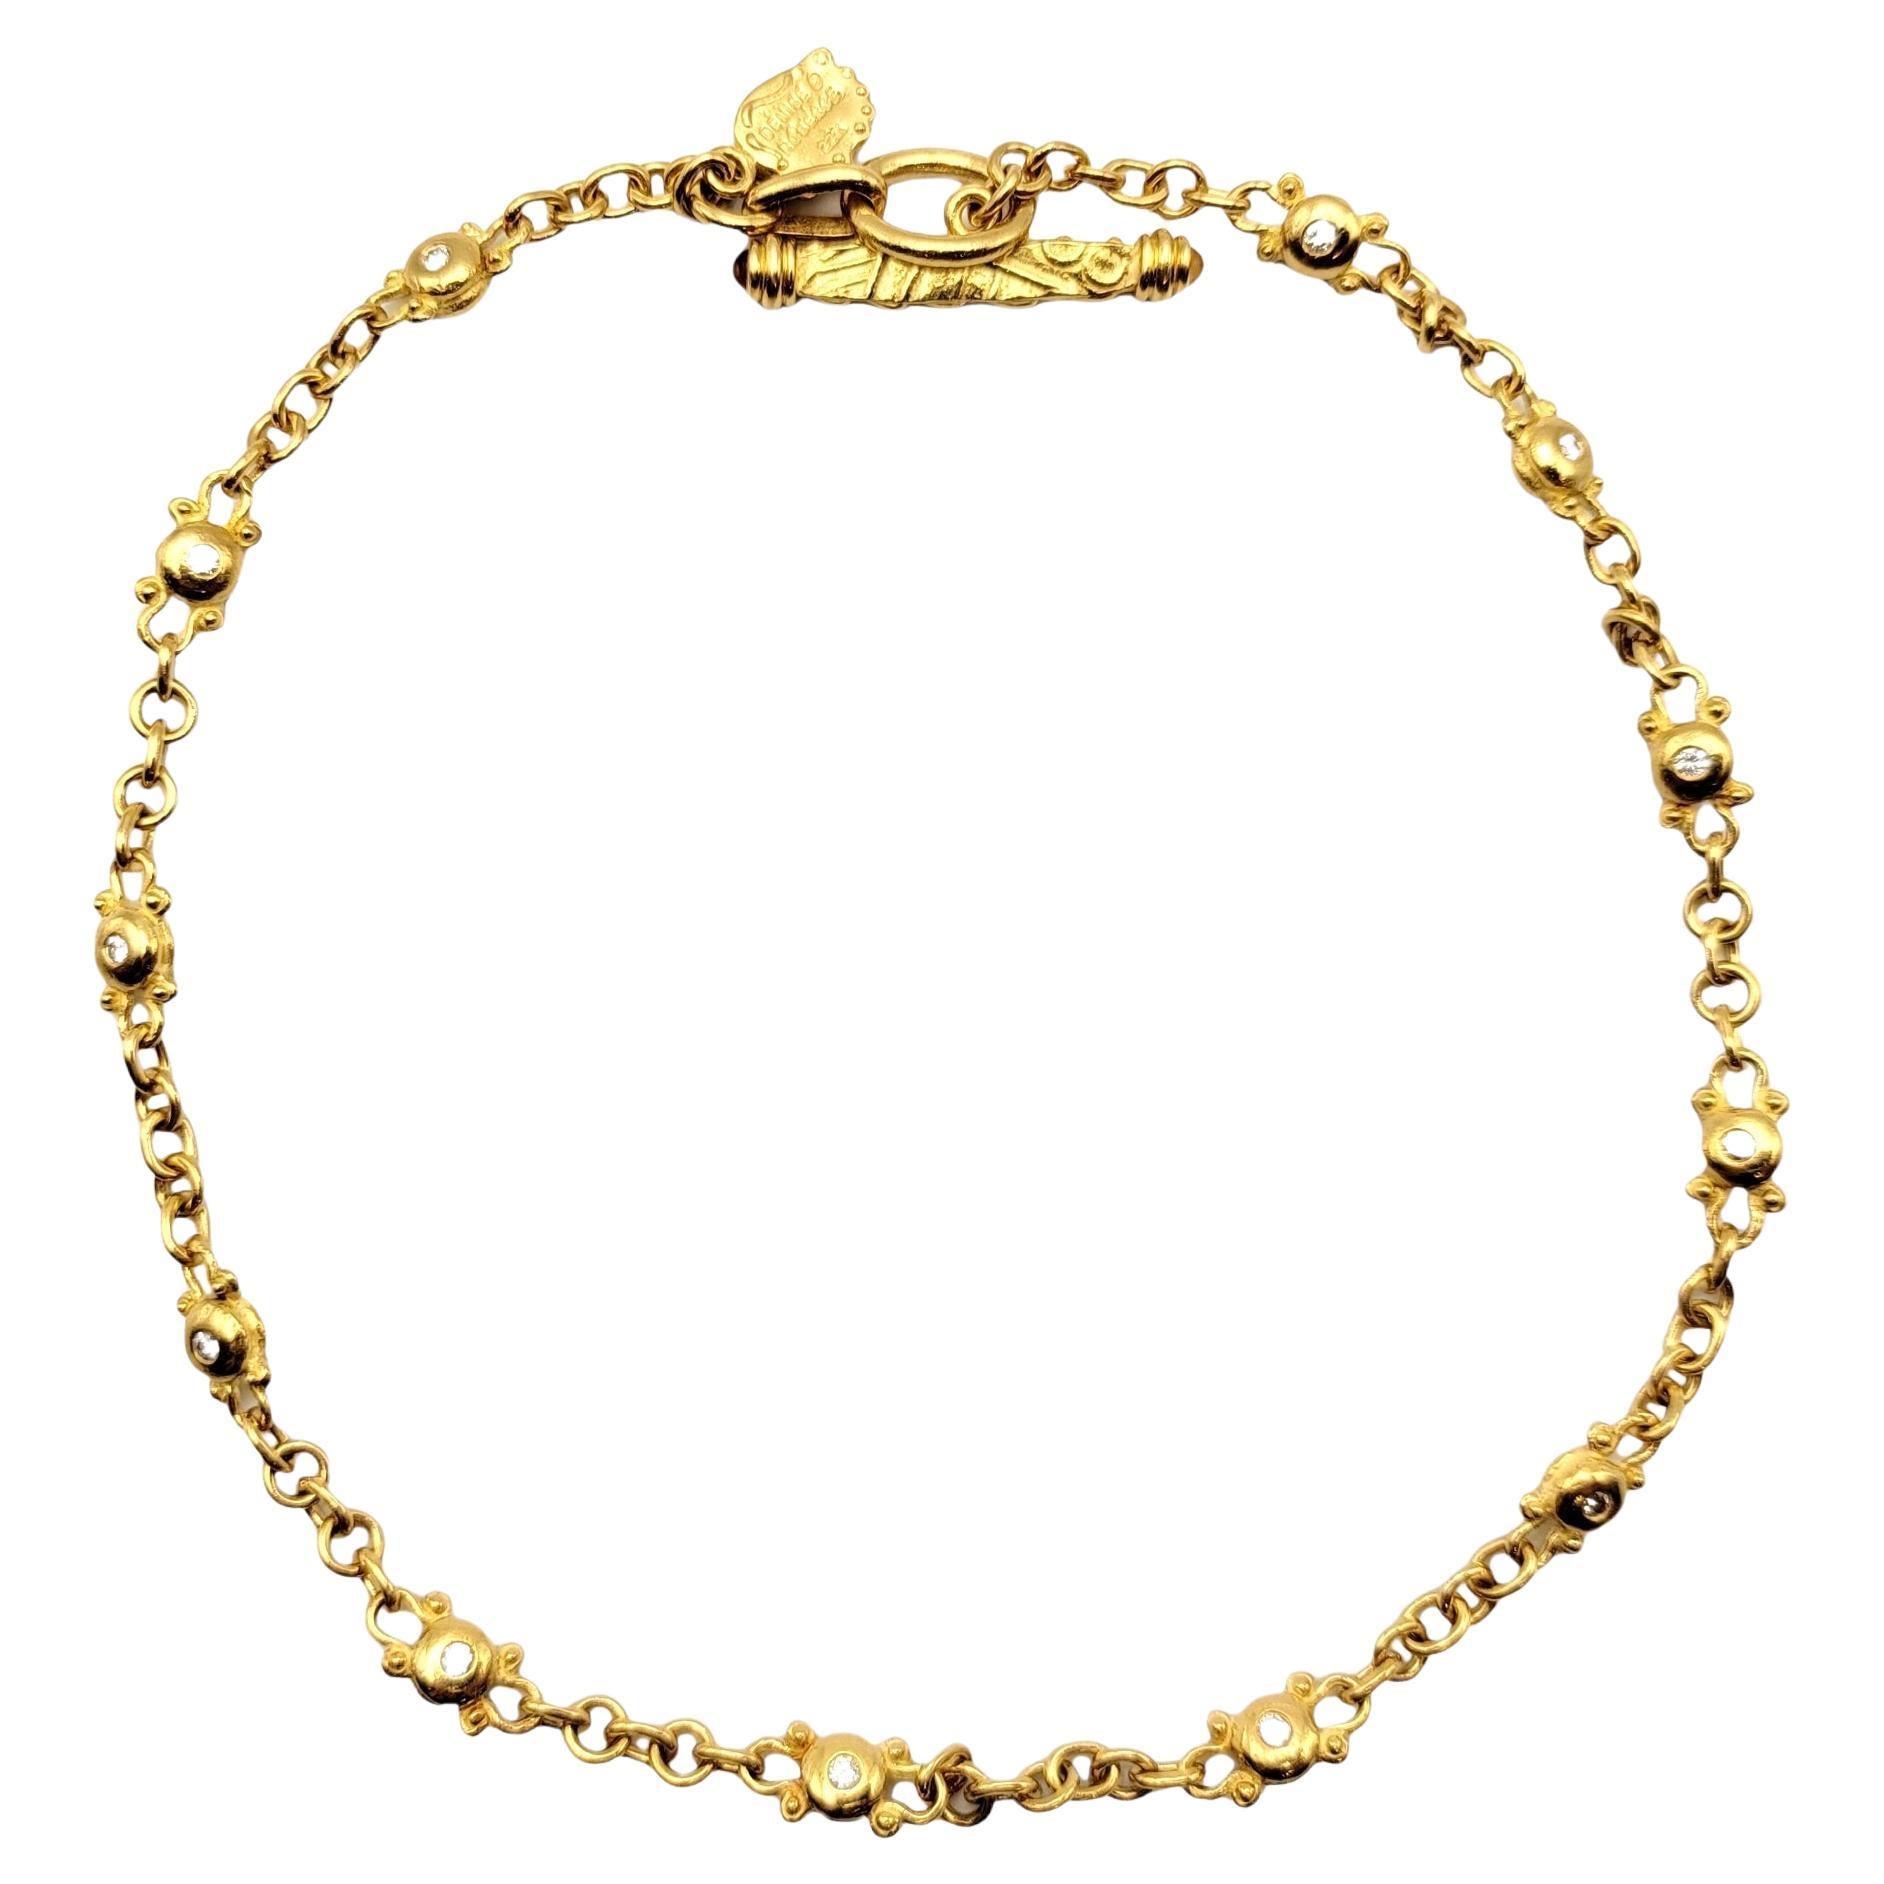 Women's Denise Roberge 22 Karat Yellow Gold Bubble Link Necklace with Diamonds